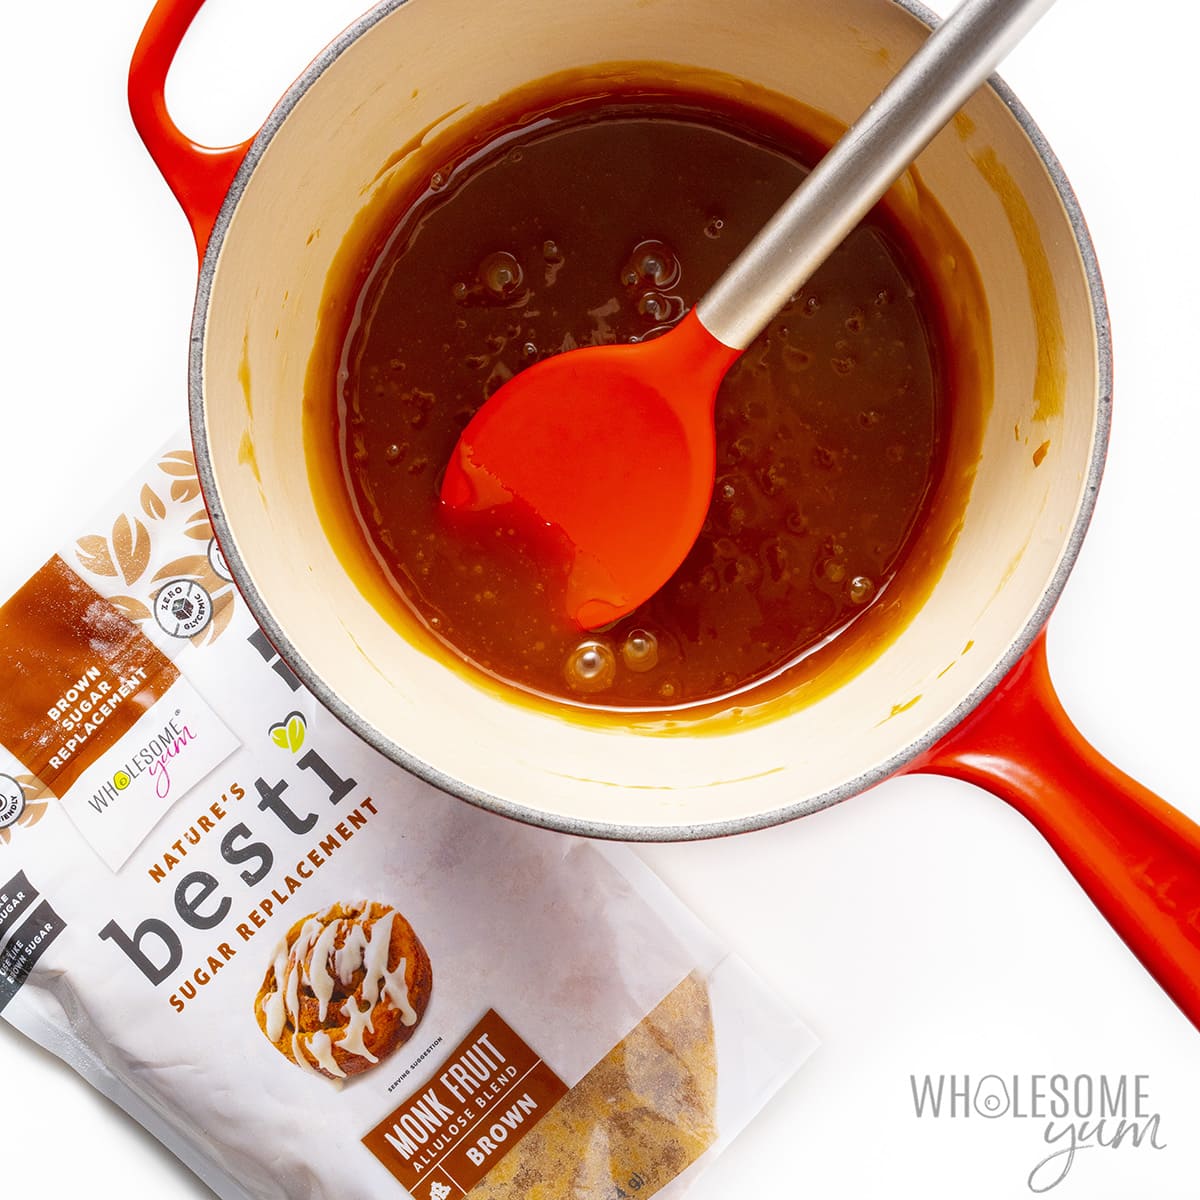 Remove keto caramel sauce from heat and add vanilla extract.